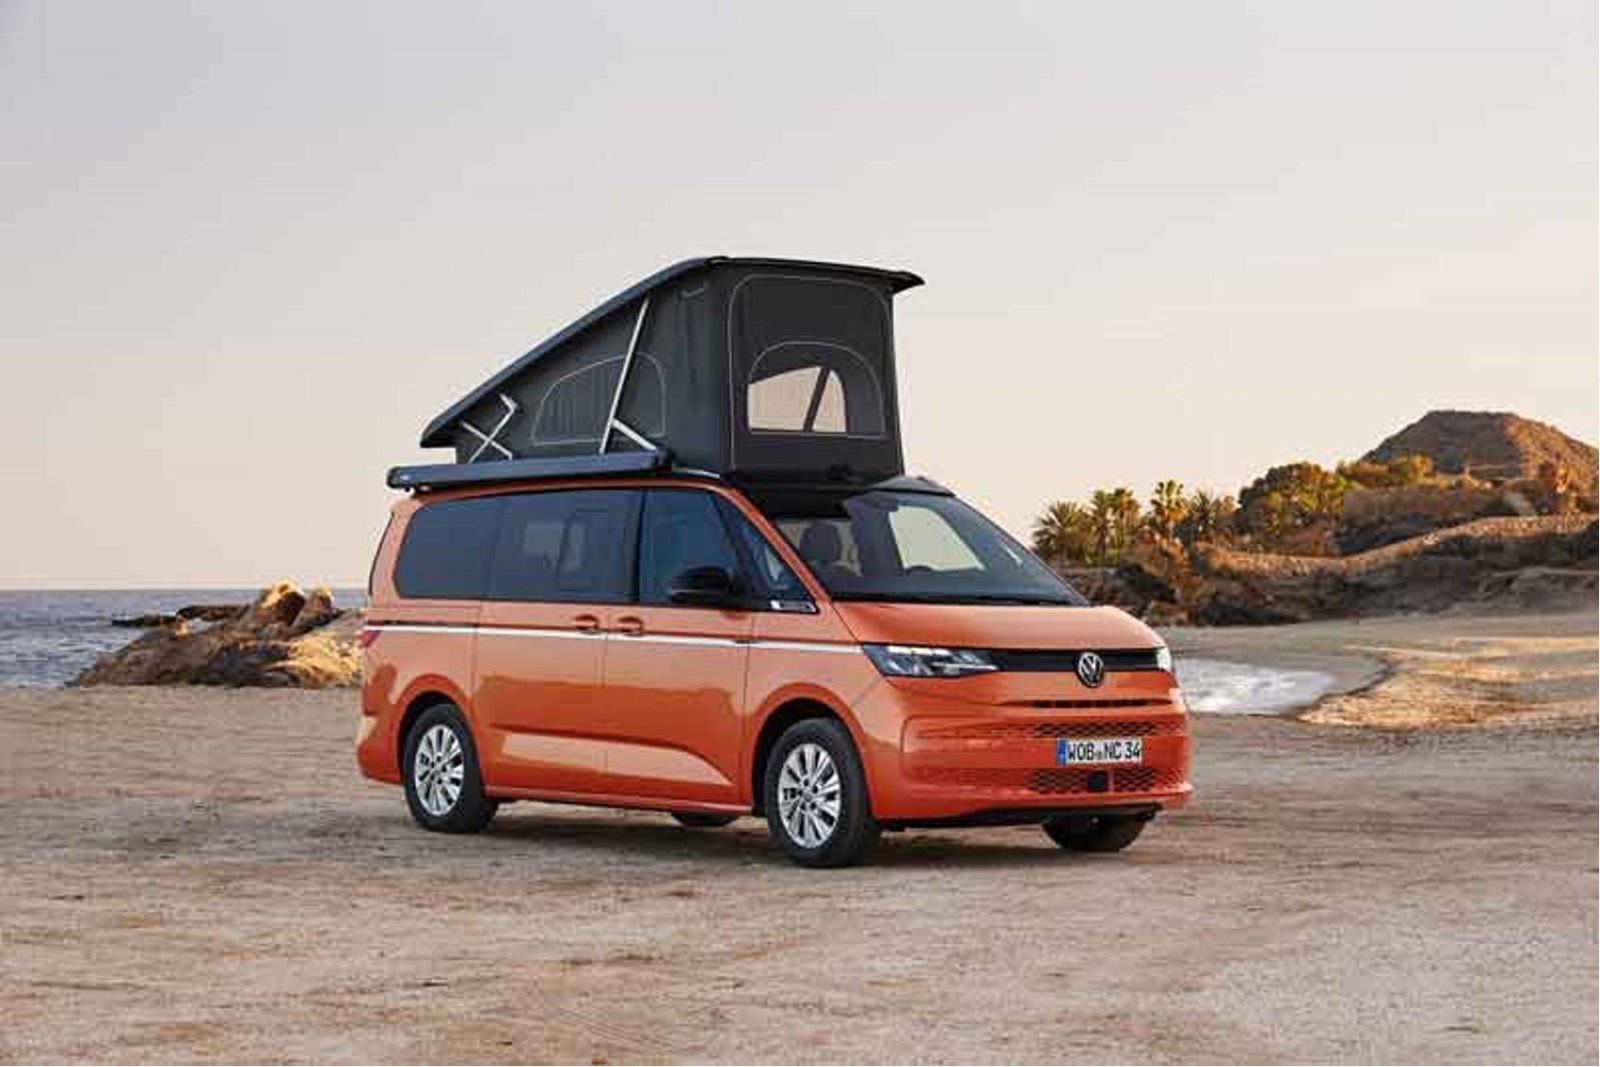 All California campervans come with a pop-top rising roof